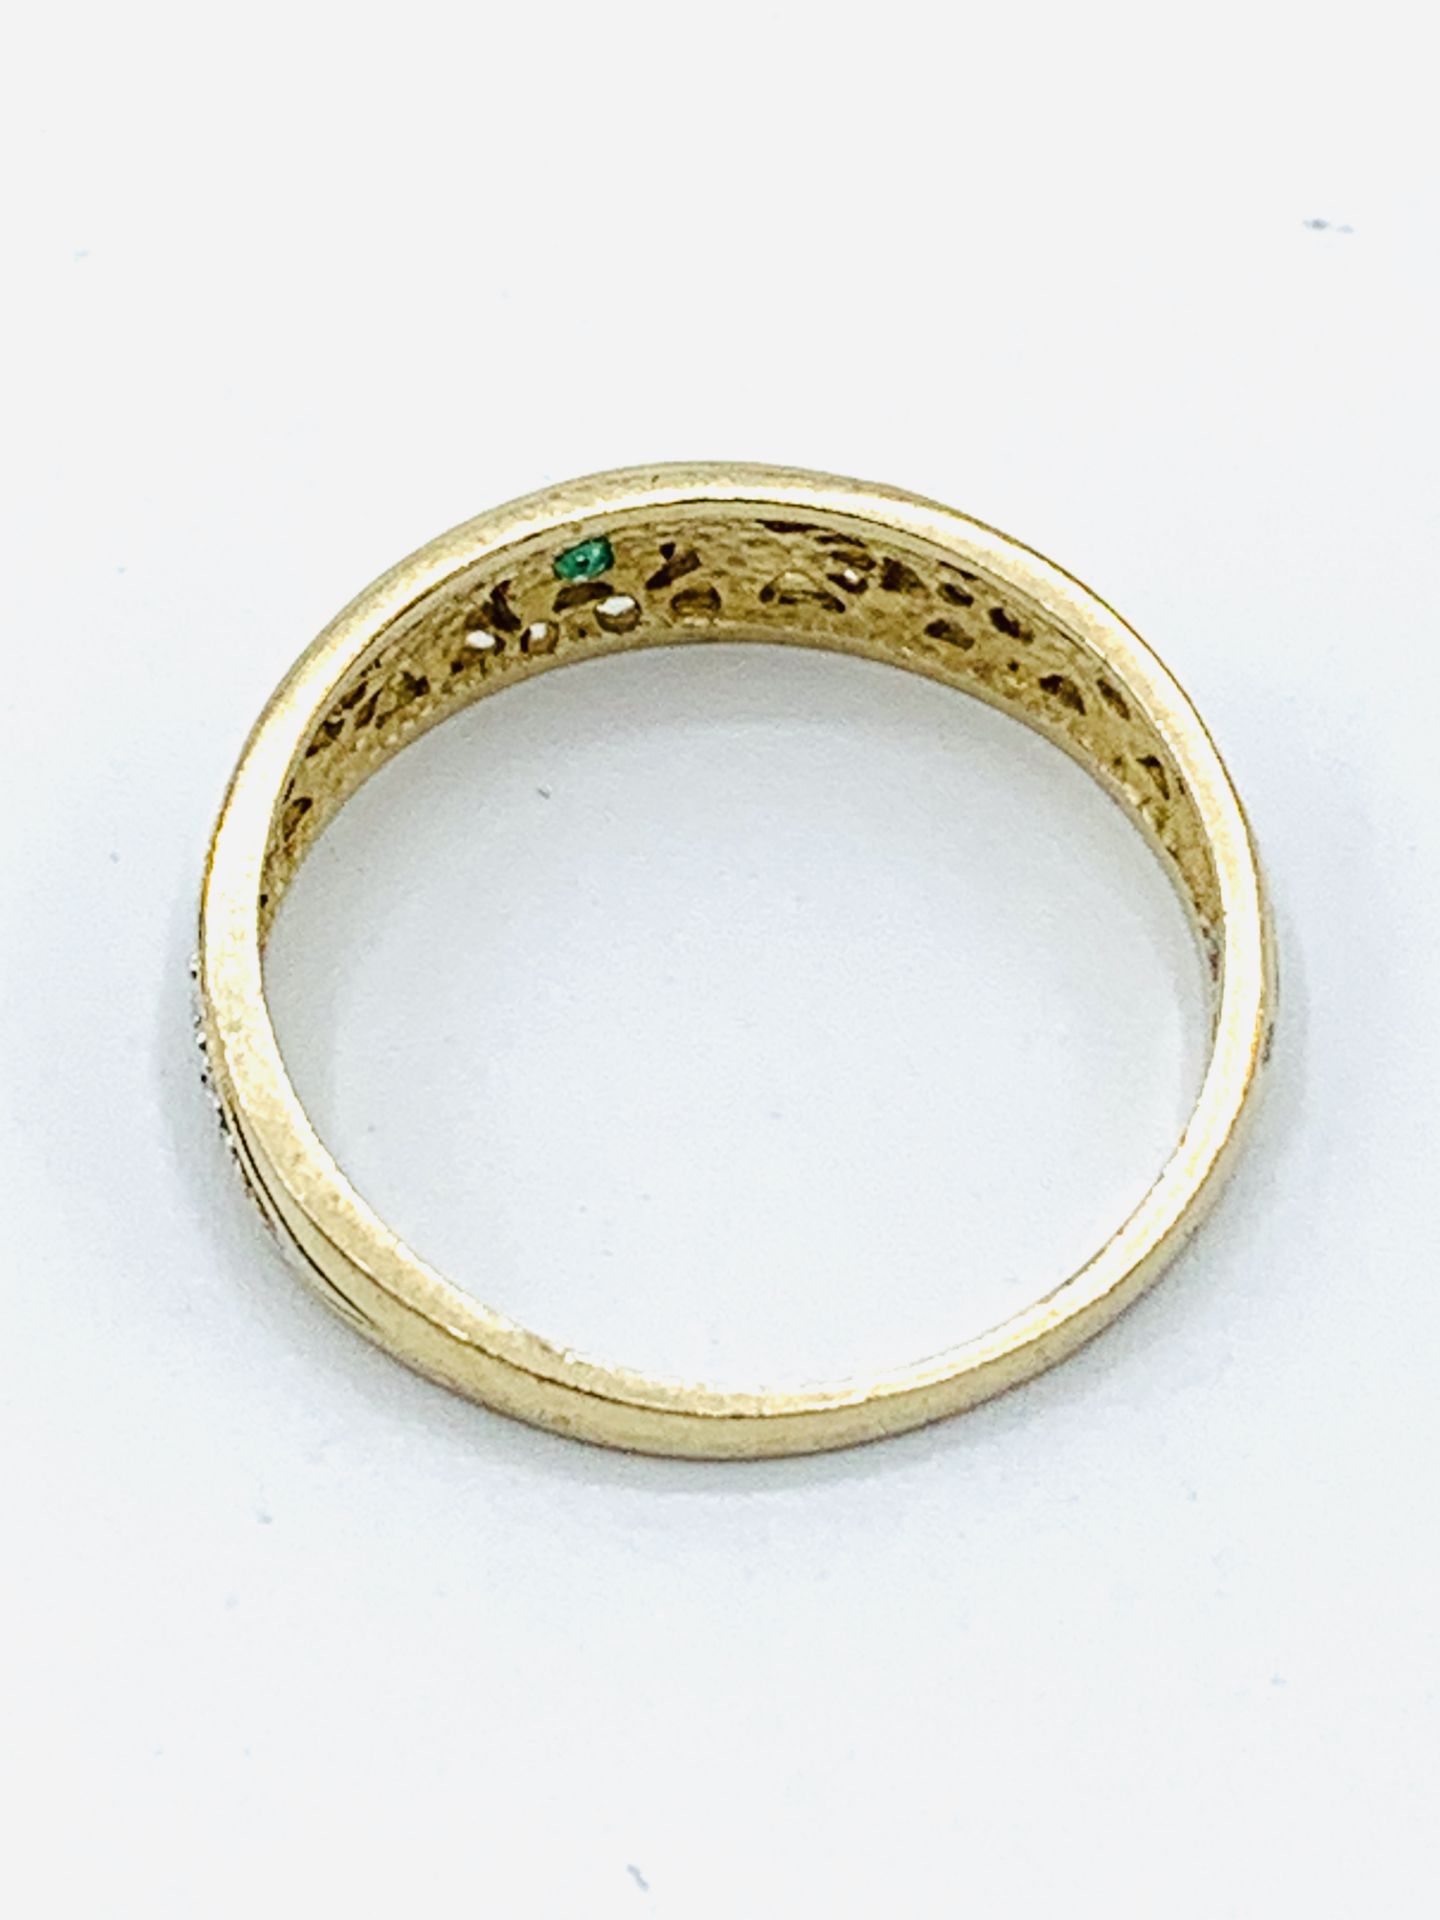 9ct gold emerald and diamond band. - Image 4 of 4